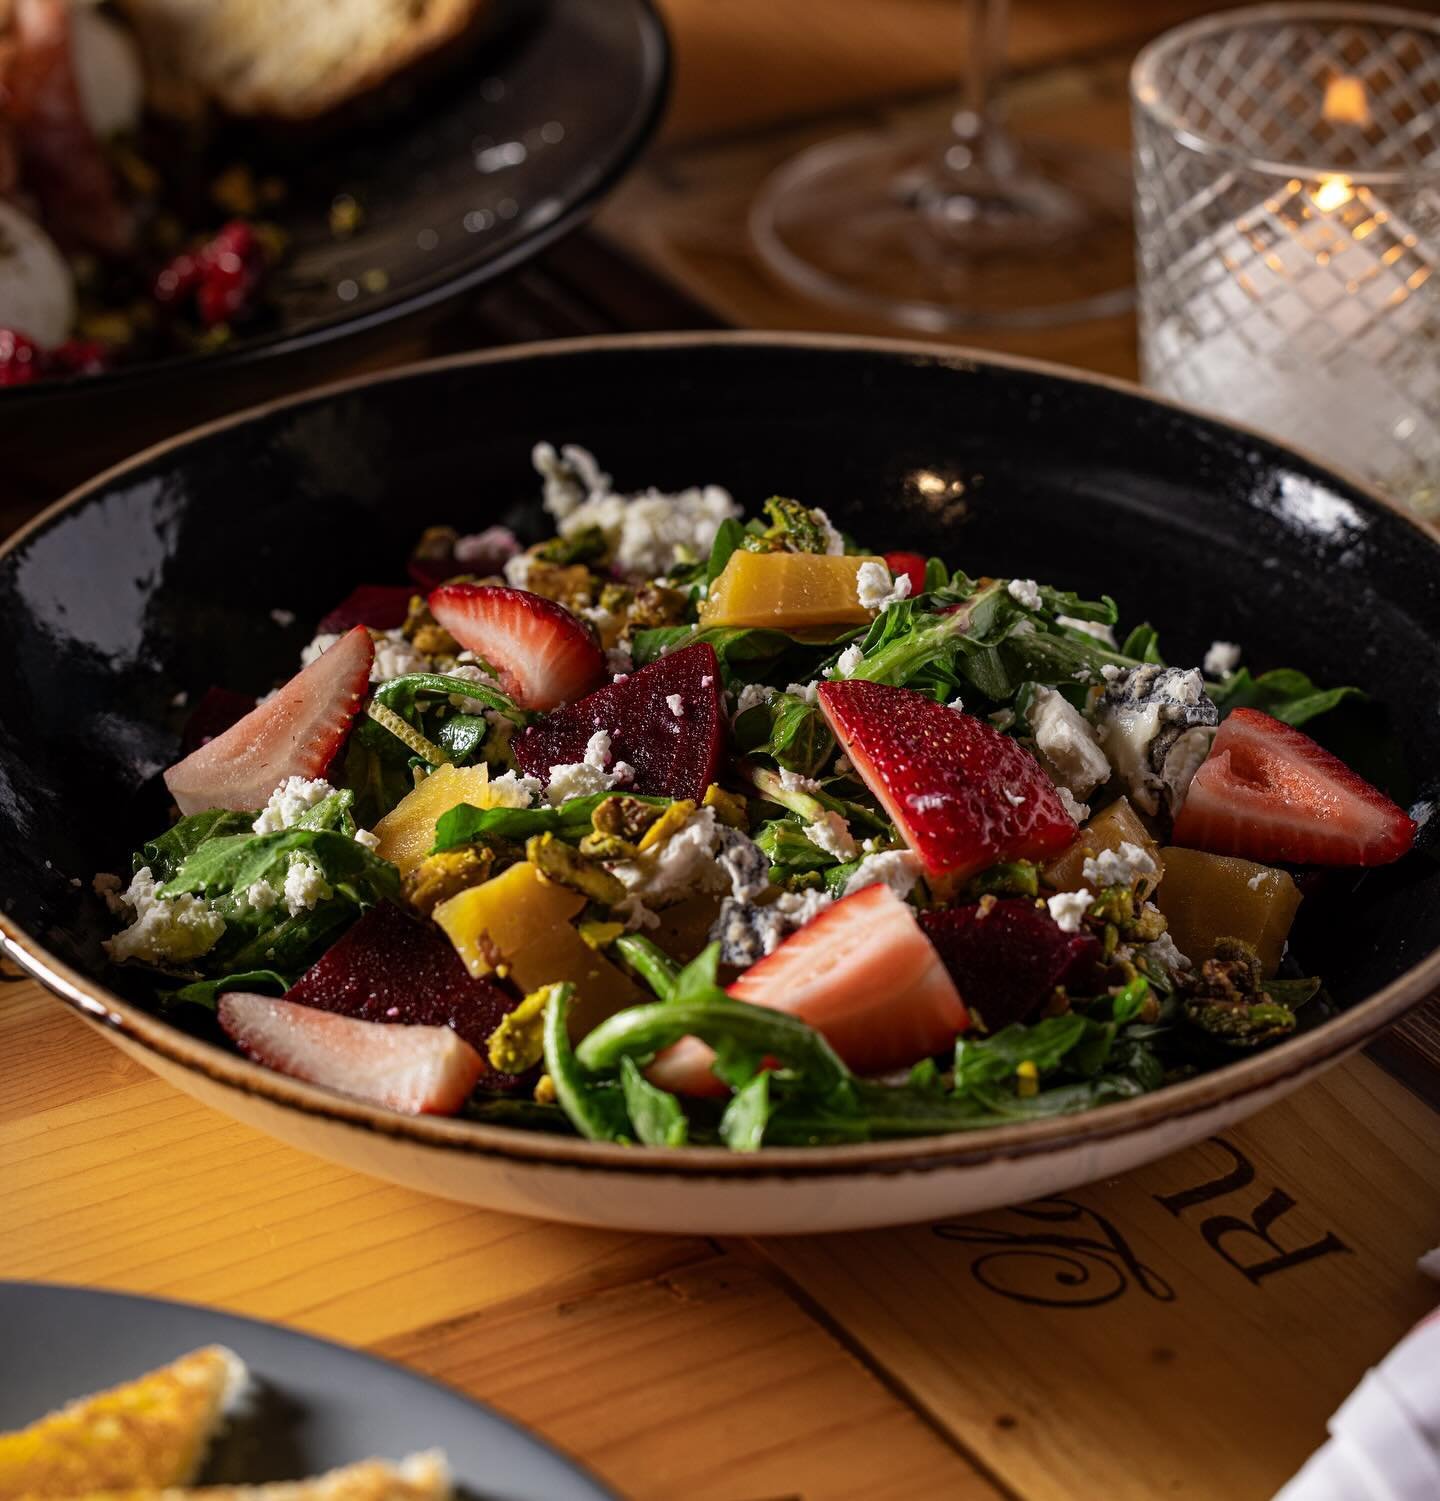 Our Beet salad with arugula, humboldt fog, strawberry, pistachio, and honey vinaigrette is perfect for this time of year! It&rsquo;s light, refreshing and bursting with flavor!! 🥗 🍓 

Reminders:
🍽️ We are now open for dinner service every Sunday! 